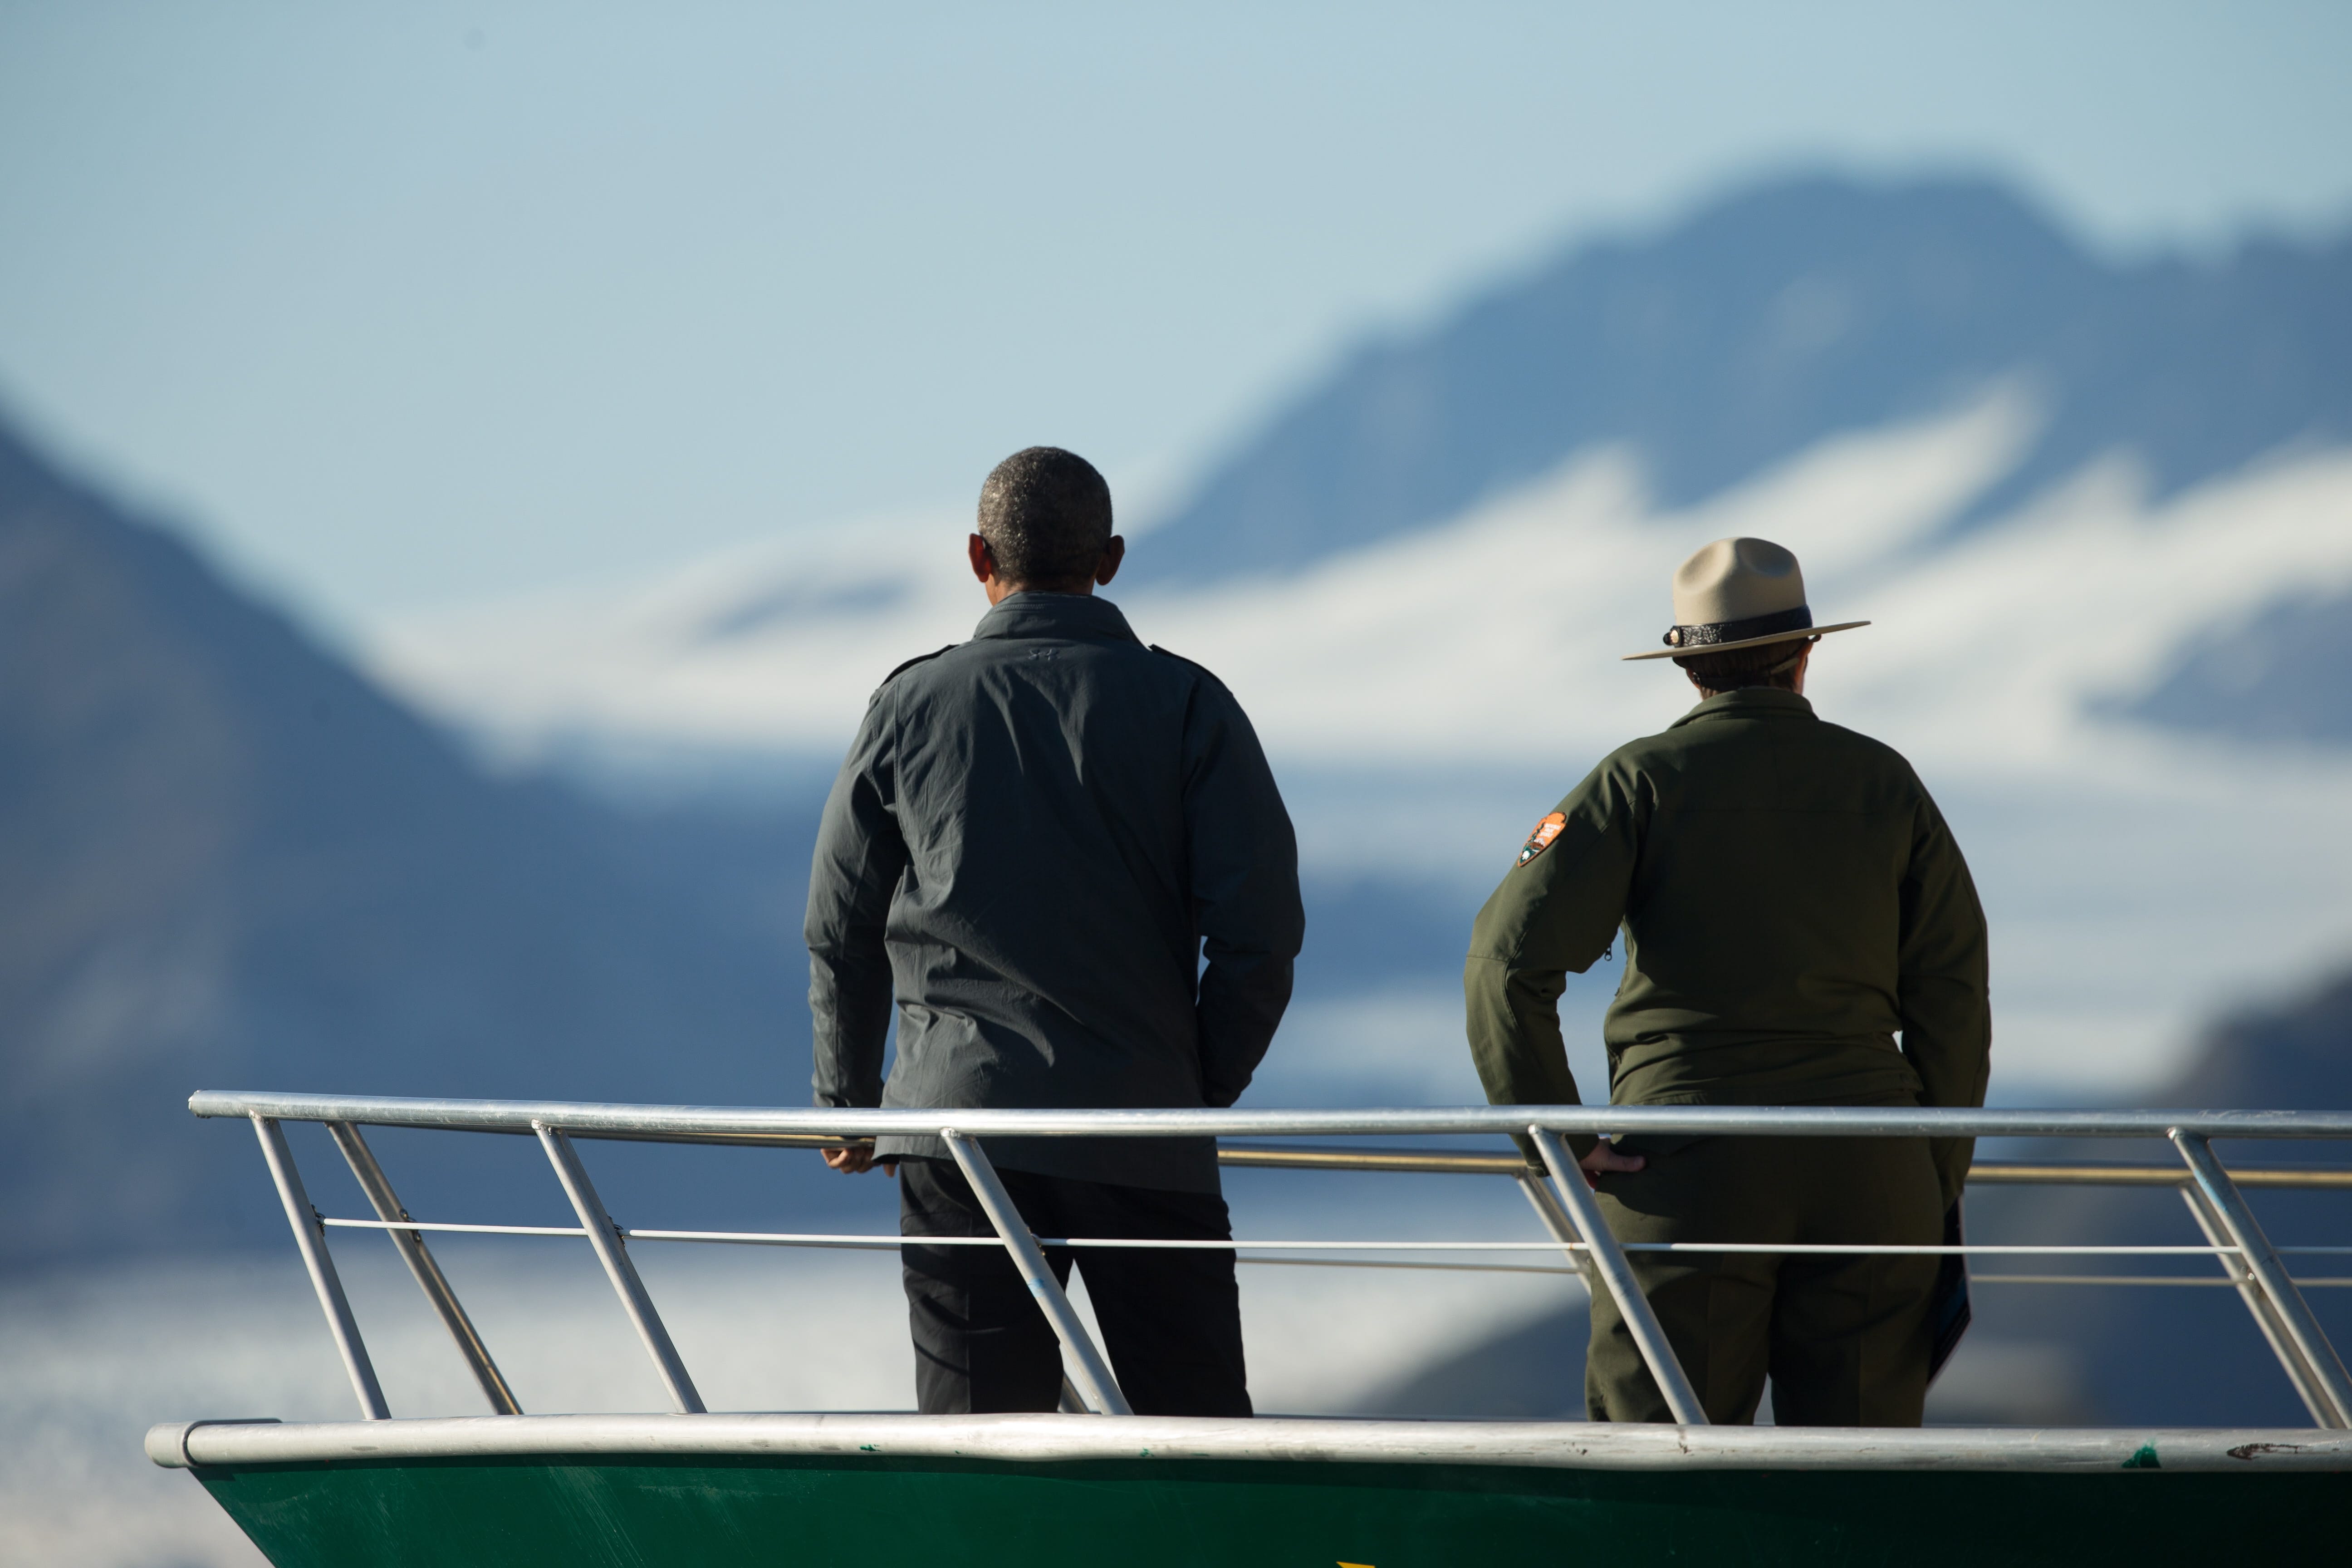 President Barack Obama, accompanied by a National Park Service employee looks at Bear Glacier, which has receded 1.8 miles in approximately 100 years, while on a boat tour to see the effects of global warming in Resurrection Cove, Tuesday in Seward, Alaska. Obama is on a historic three-day trip to Alaska aimed at showing solidarity with a state often overlooked by Washington, while using its glorious but changing landscape as an urgent call to action on climate change.